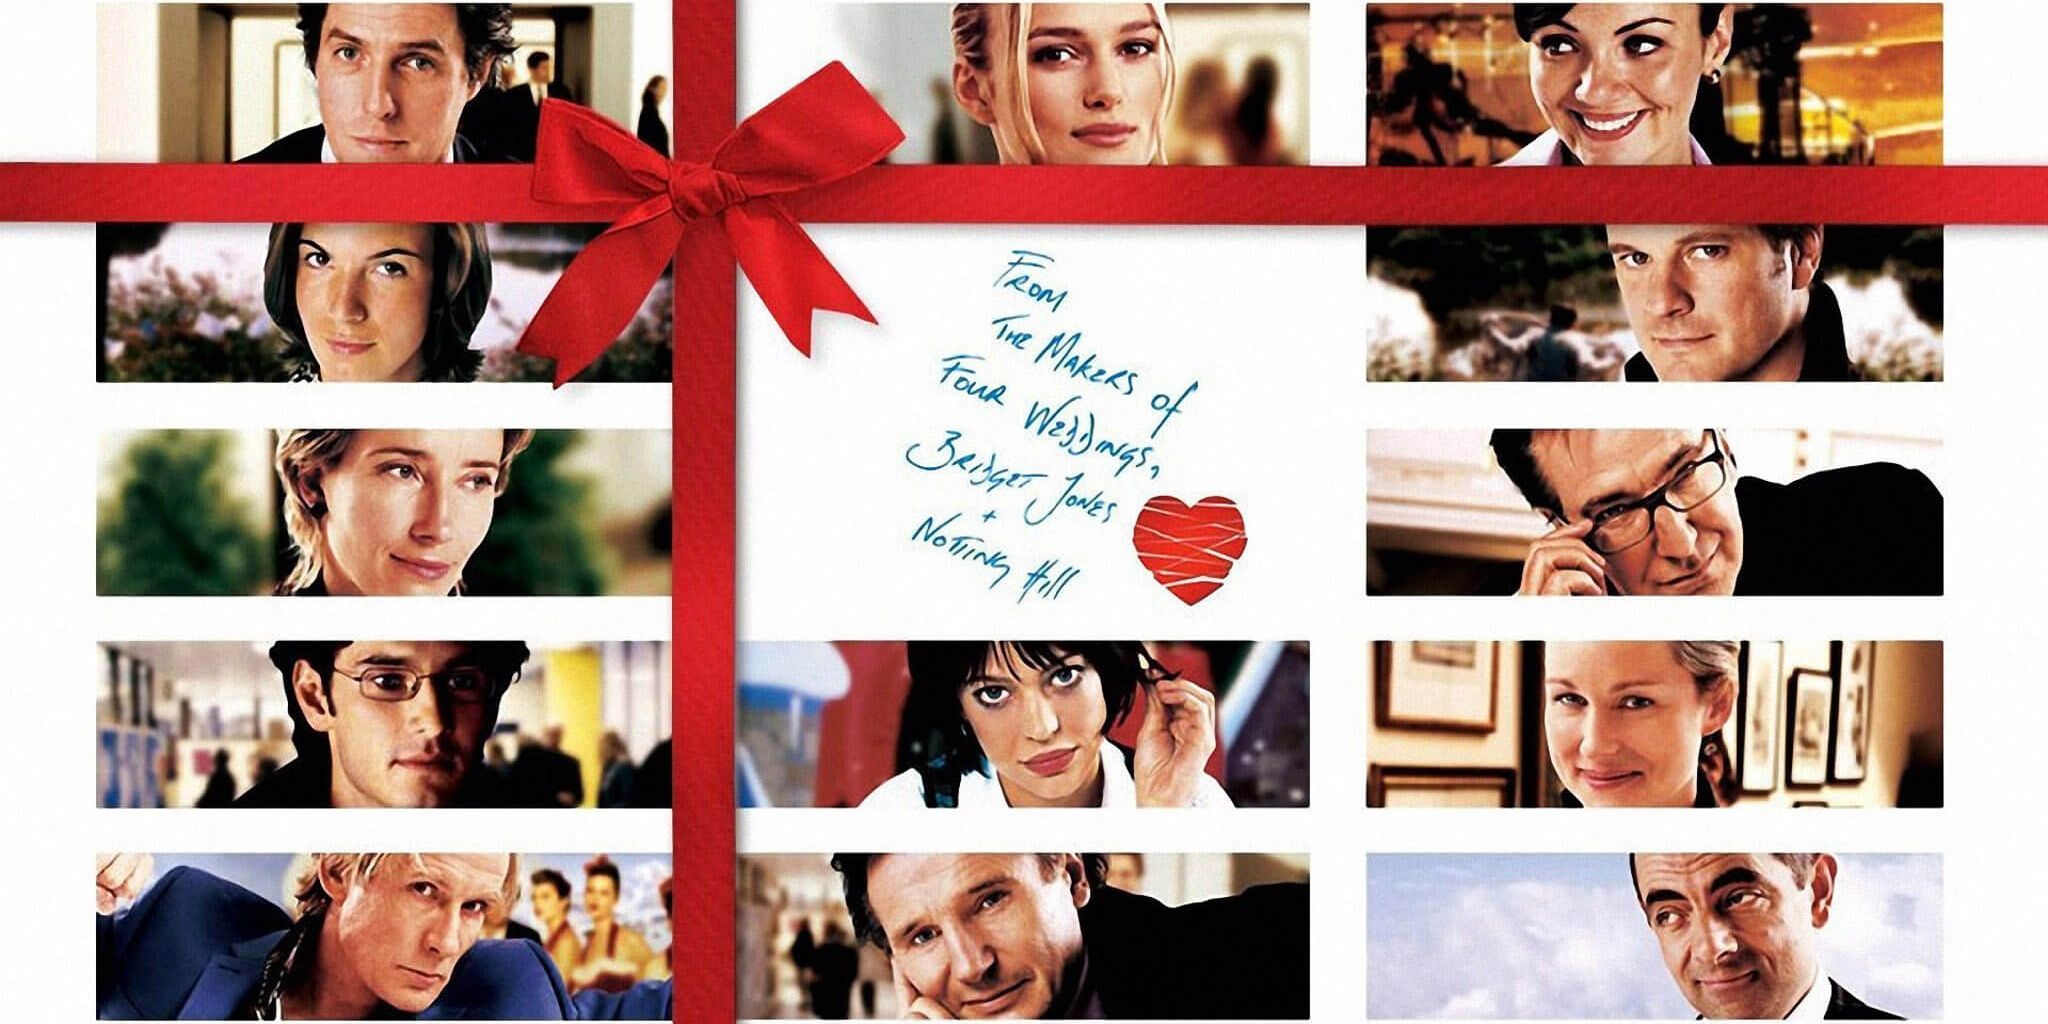 Poster featuring the characters from Love, Actually